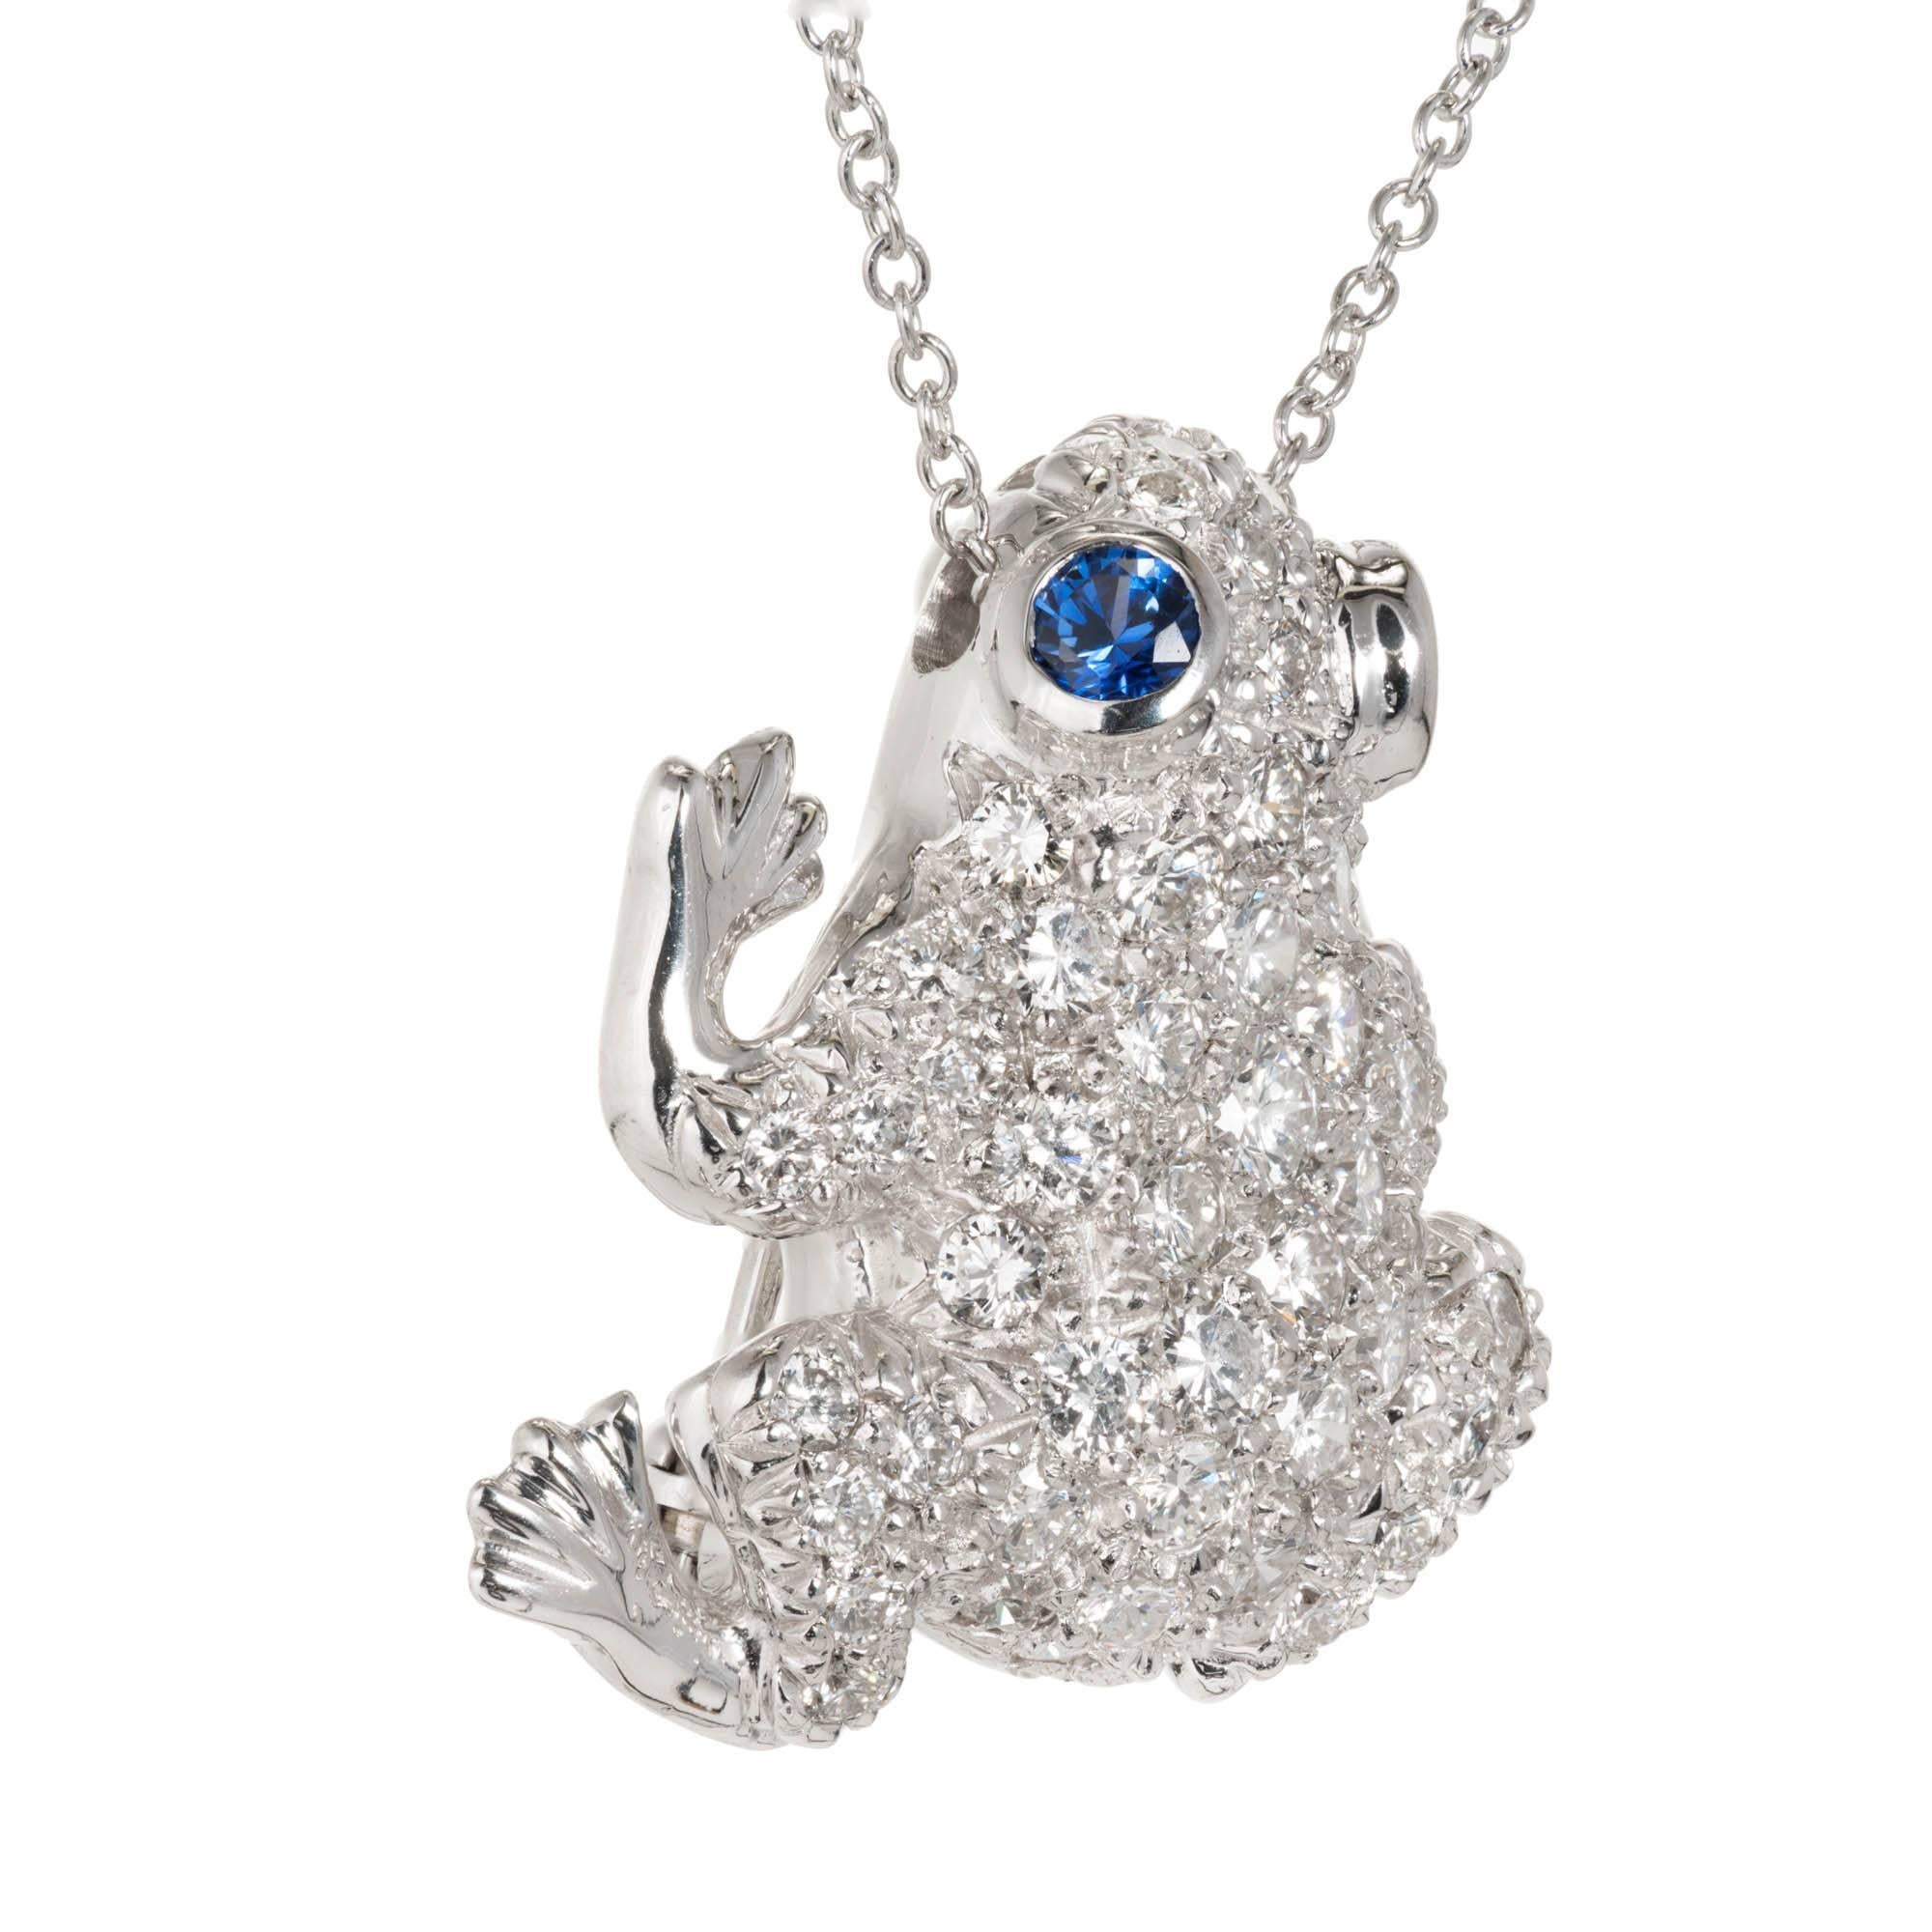 3-D Frog pin pendant in 18k white gold Pavé set with full cut Diamonds very close together. Sapphire eyes, on a 18 inch white gold chain. 

54 round Diamonds, approx. total weight 1.50cts, F, VS
2 round fine blue Sapphires, approx. total weight